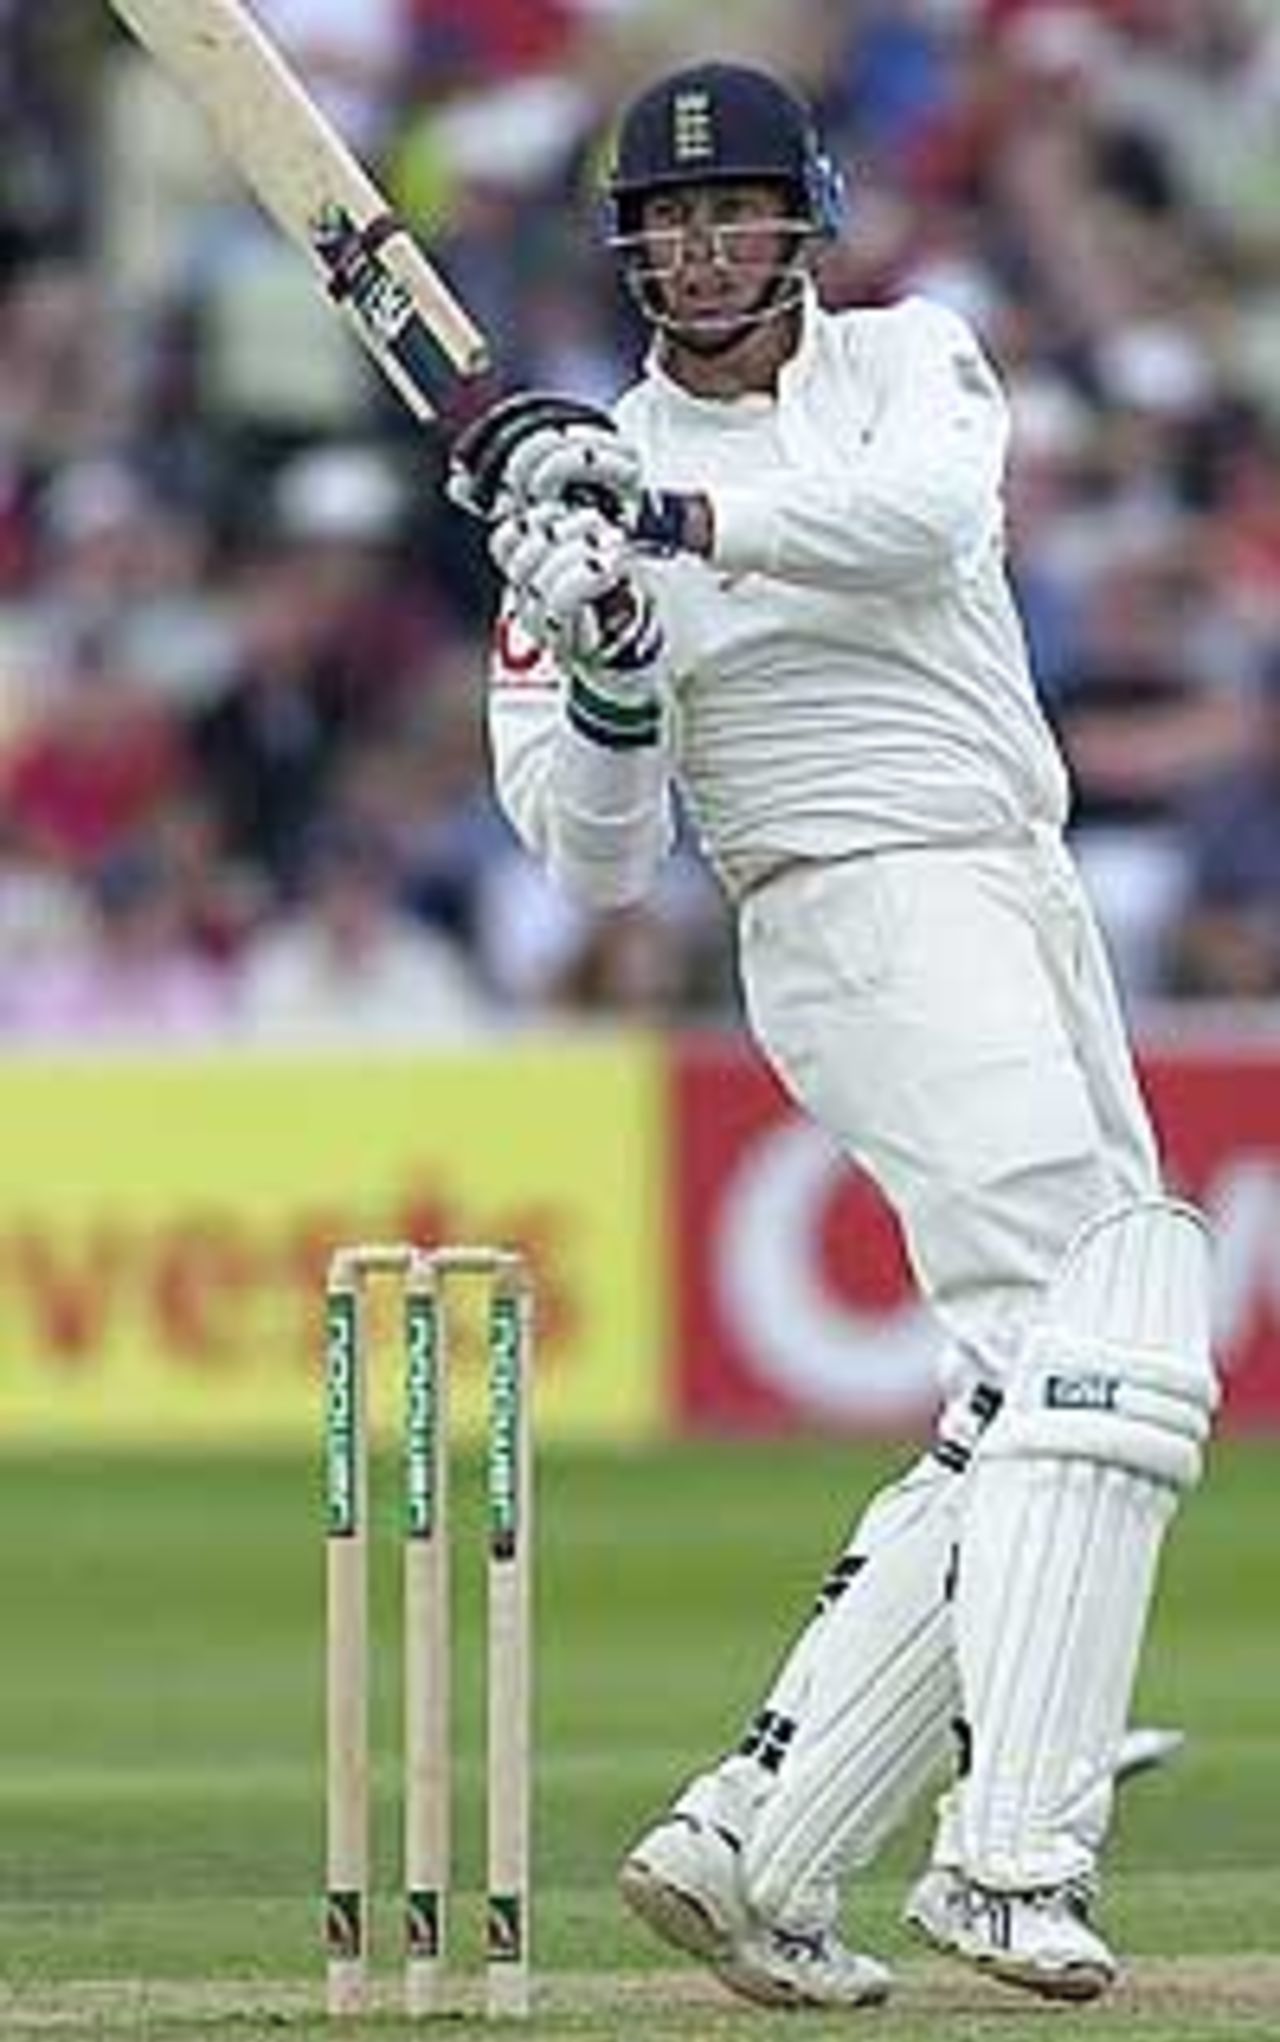 Taken in the 2001 Ashes series